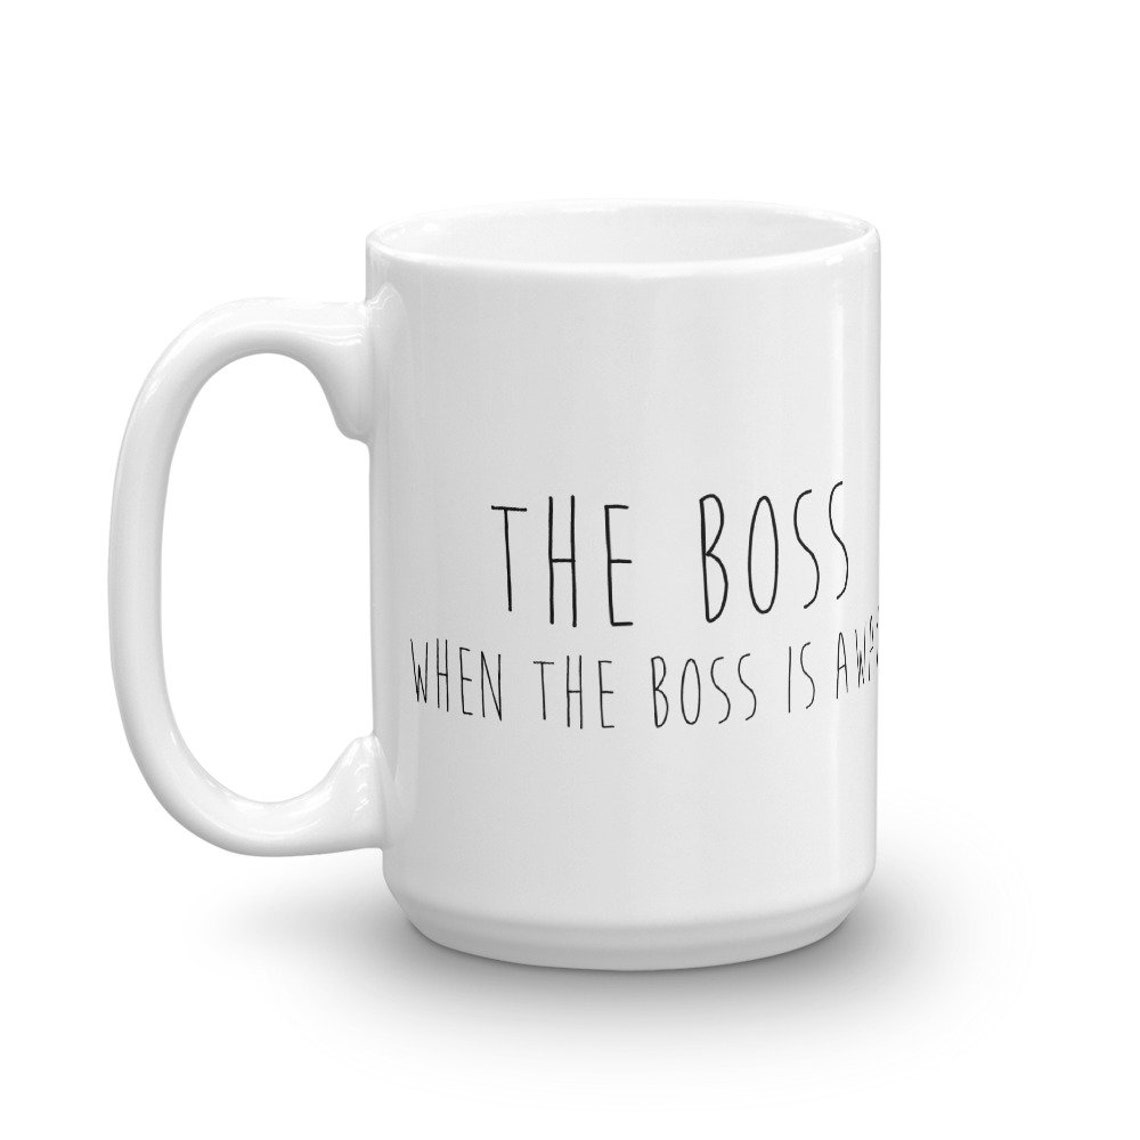 The Boss When the Boss is Away - Etsy